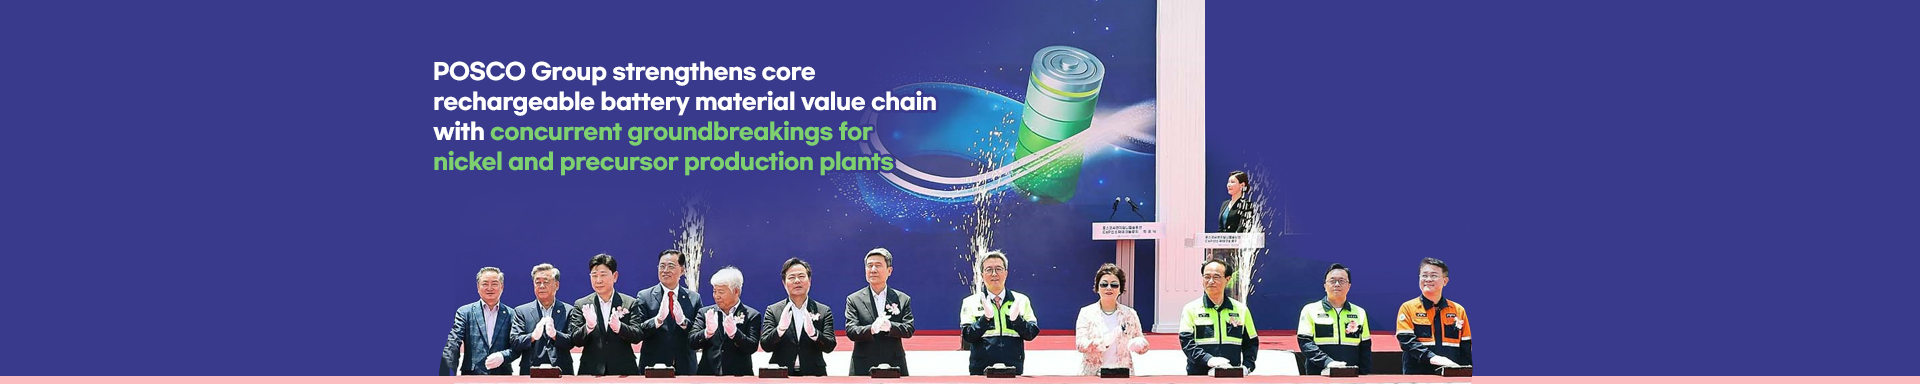 POSCO Group strengthens core rechargeable battery material value chain with concurrent groundbreakings for nickel and precursor production plants